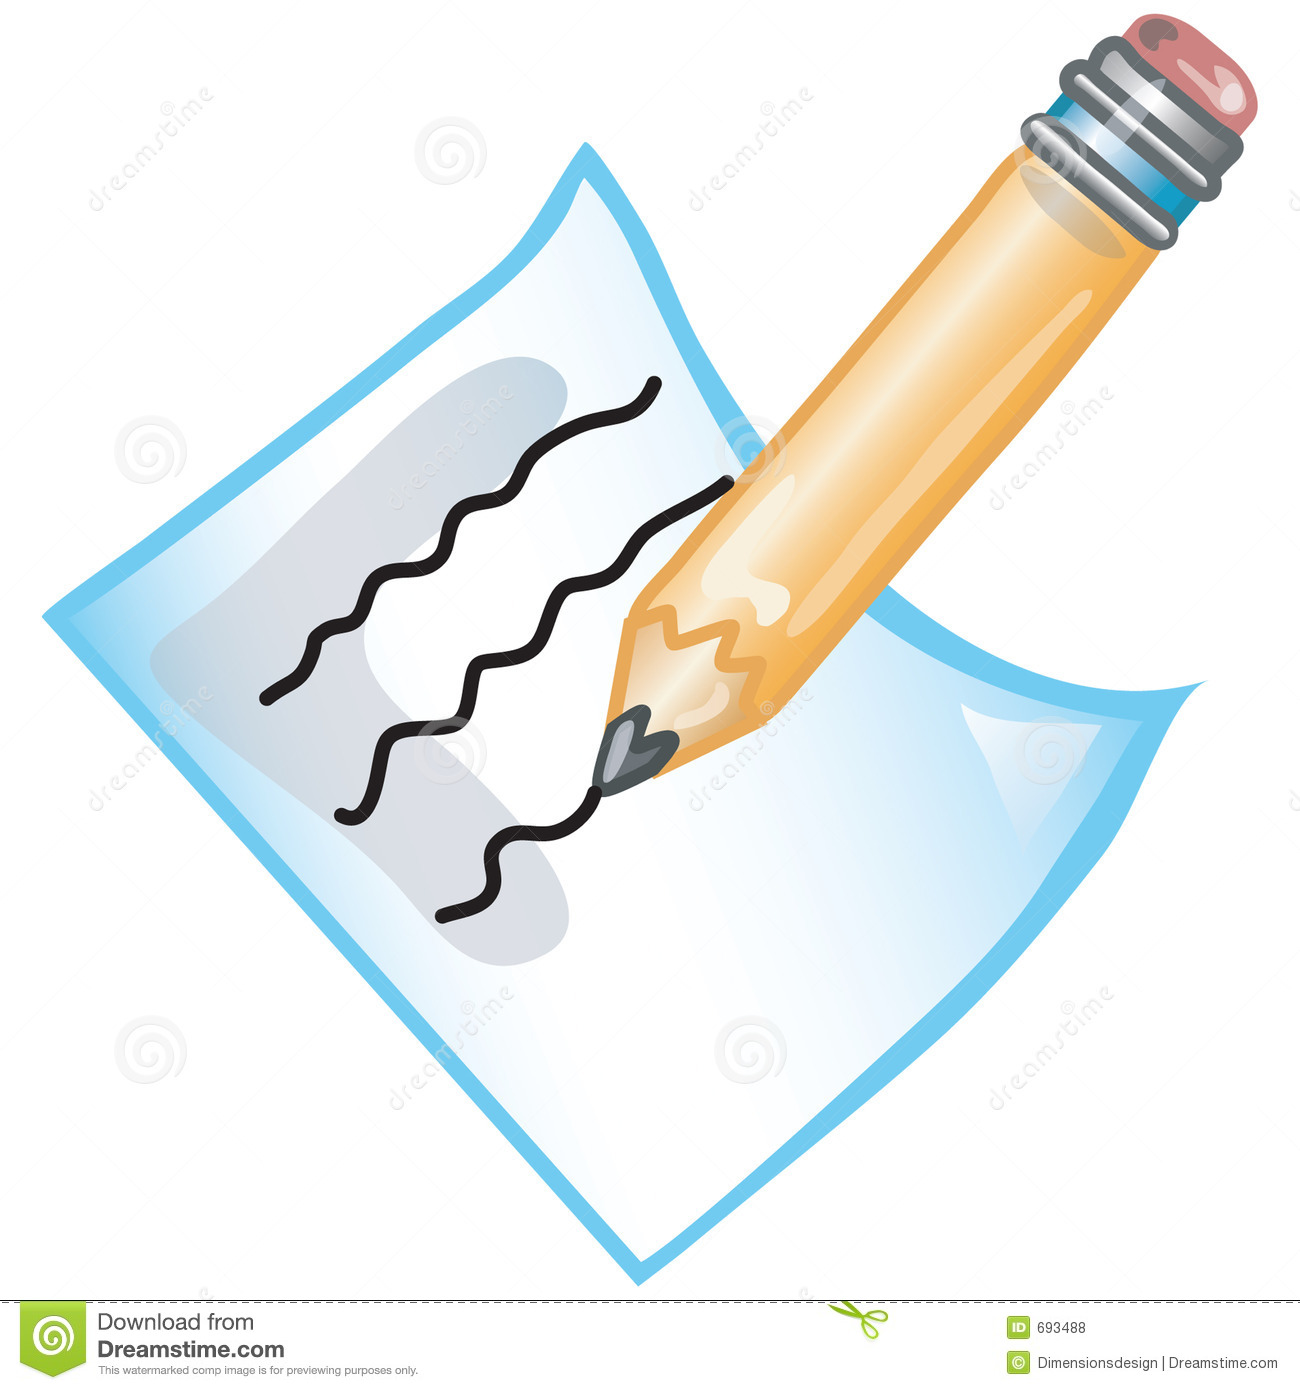 Stylized Icon Of A Pencil And Paper File 3 Of 20 In This Series